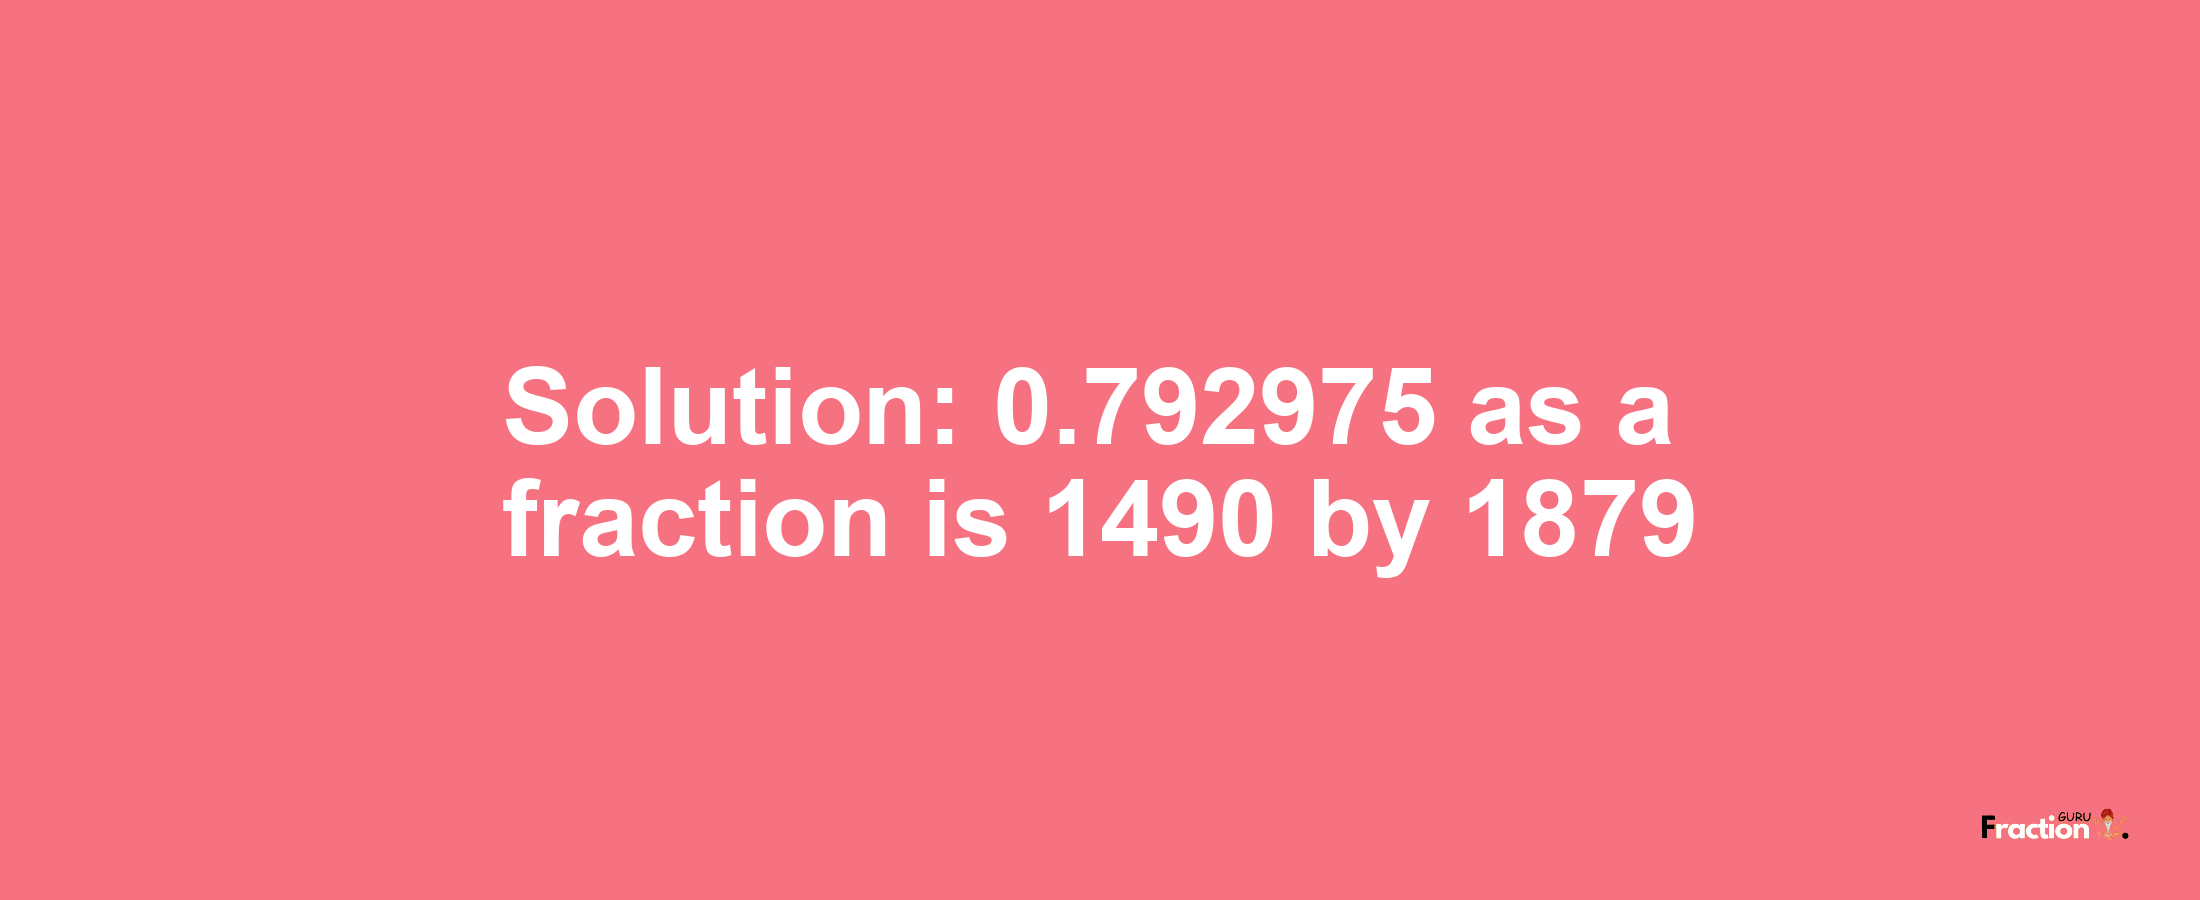 Solution:0.792975 as a fraction is 1490/1879